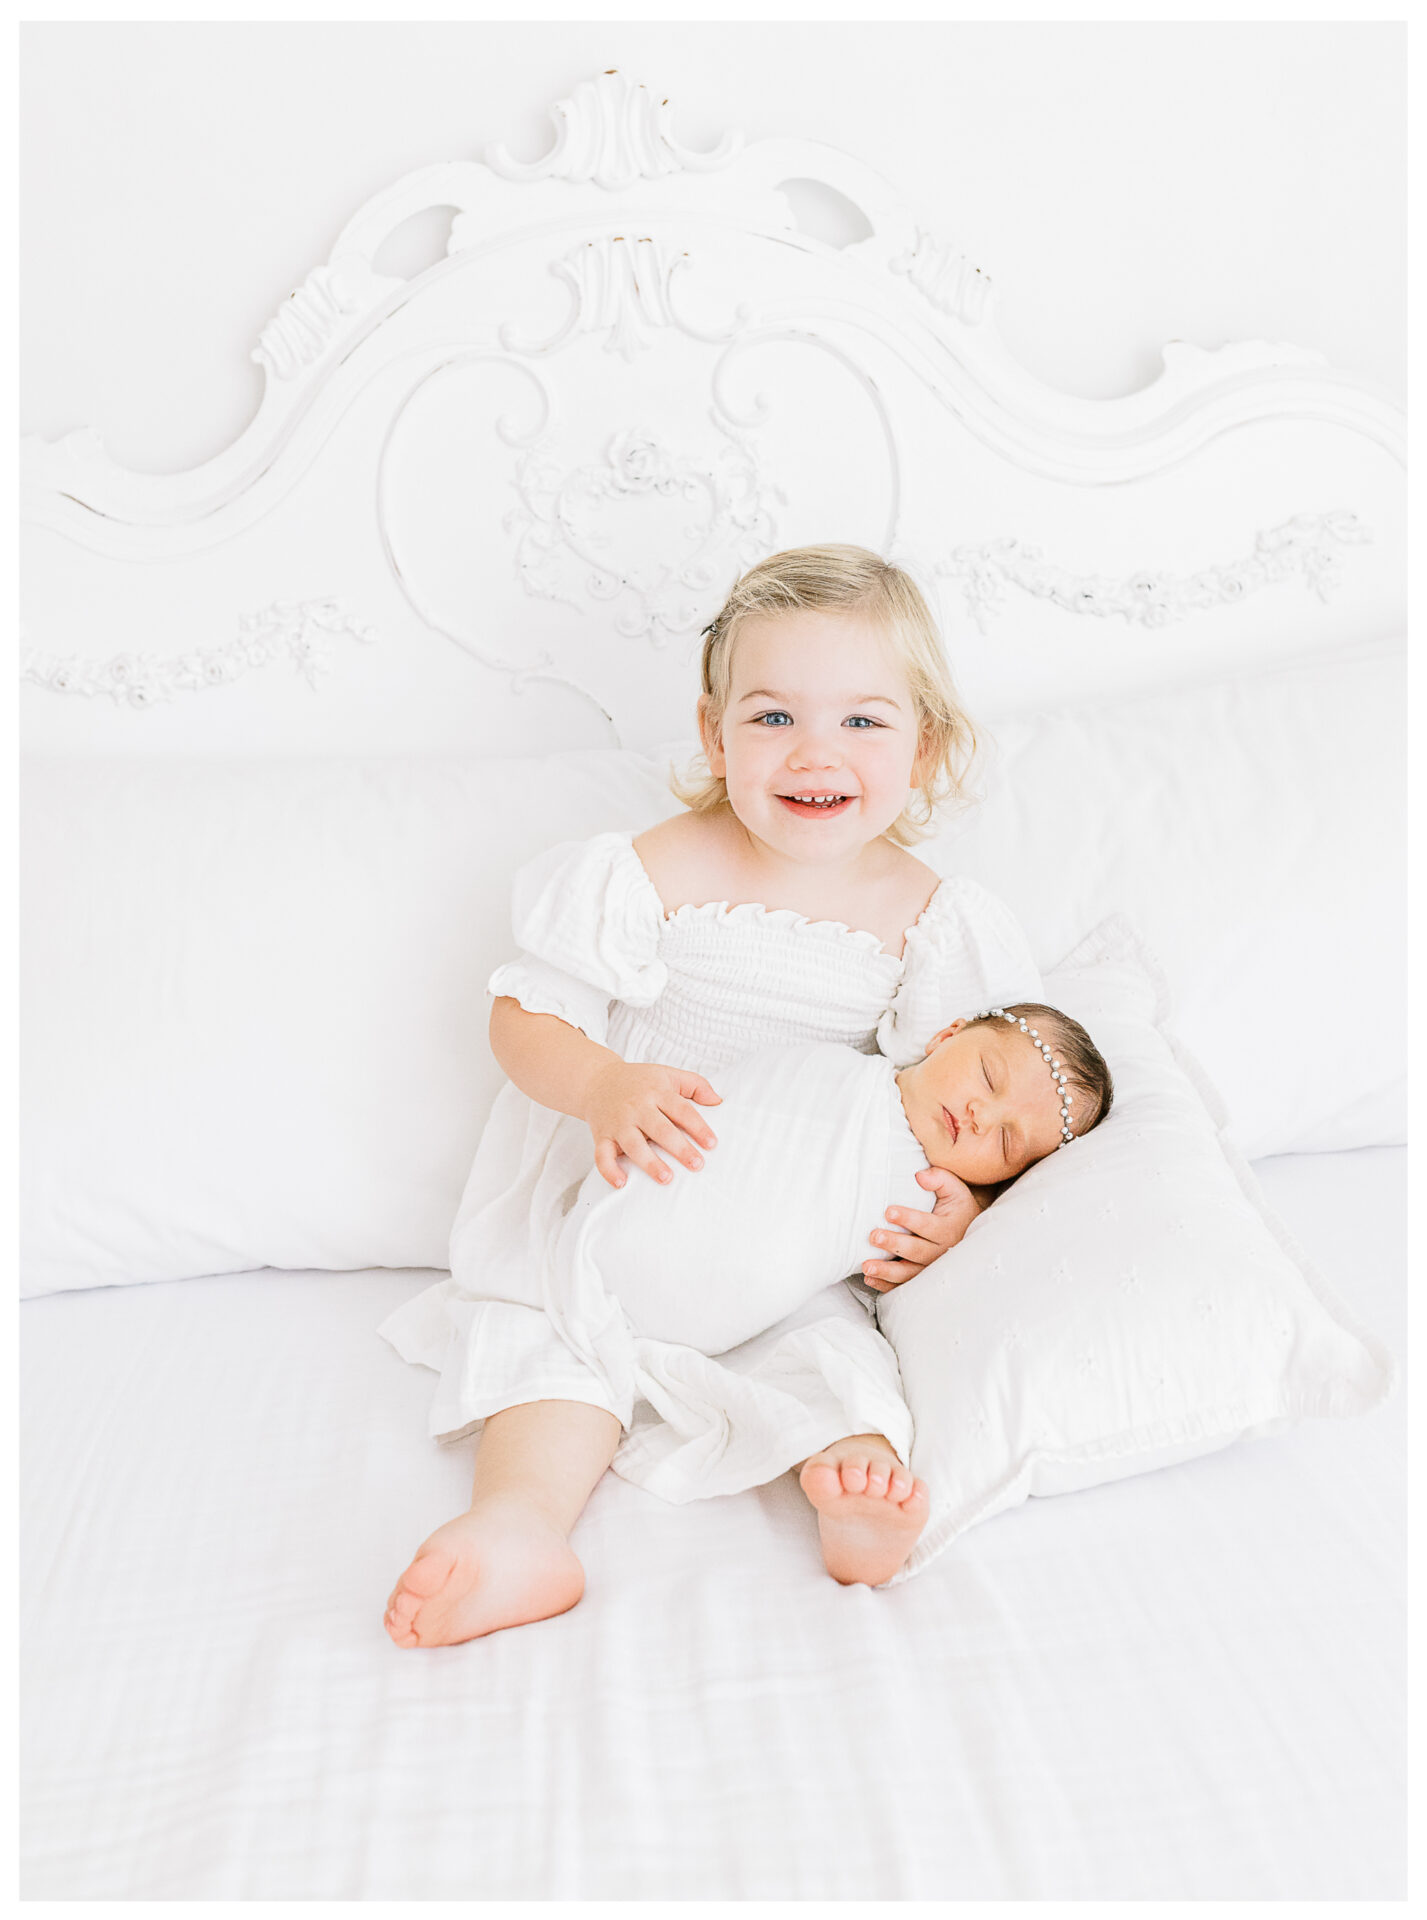 Winter Freire Photography | Dayton, Ohio Newborn Session | Daughter holding her newborn sister while sitting on a bed